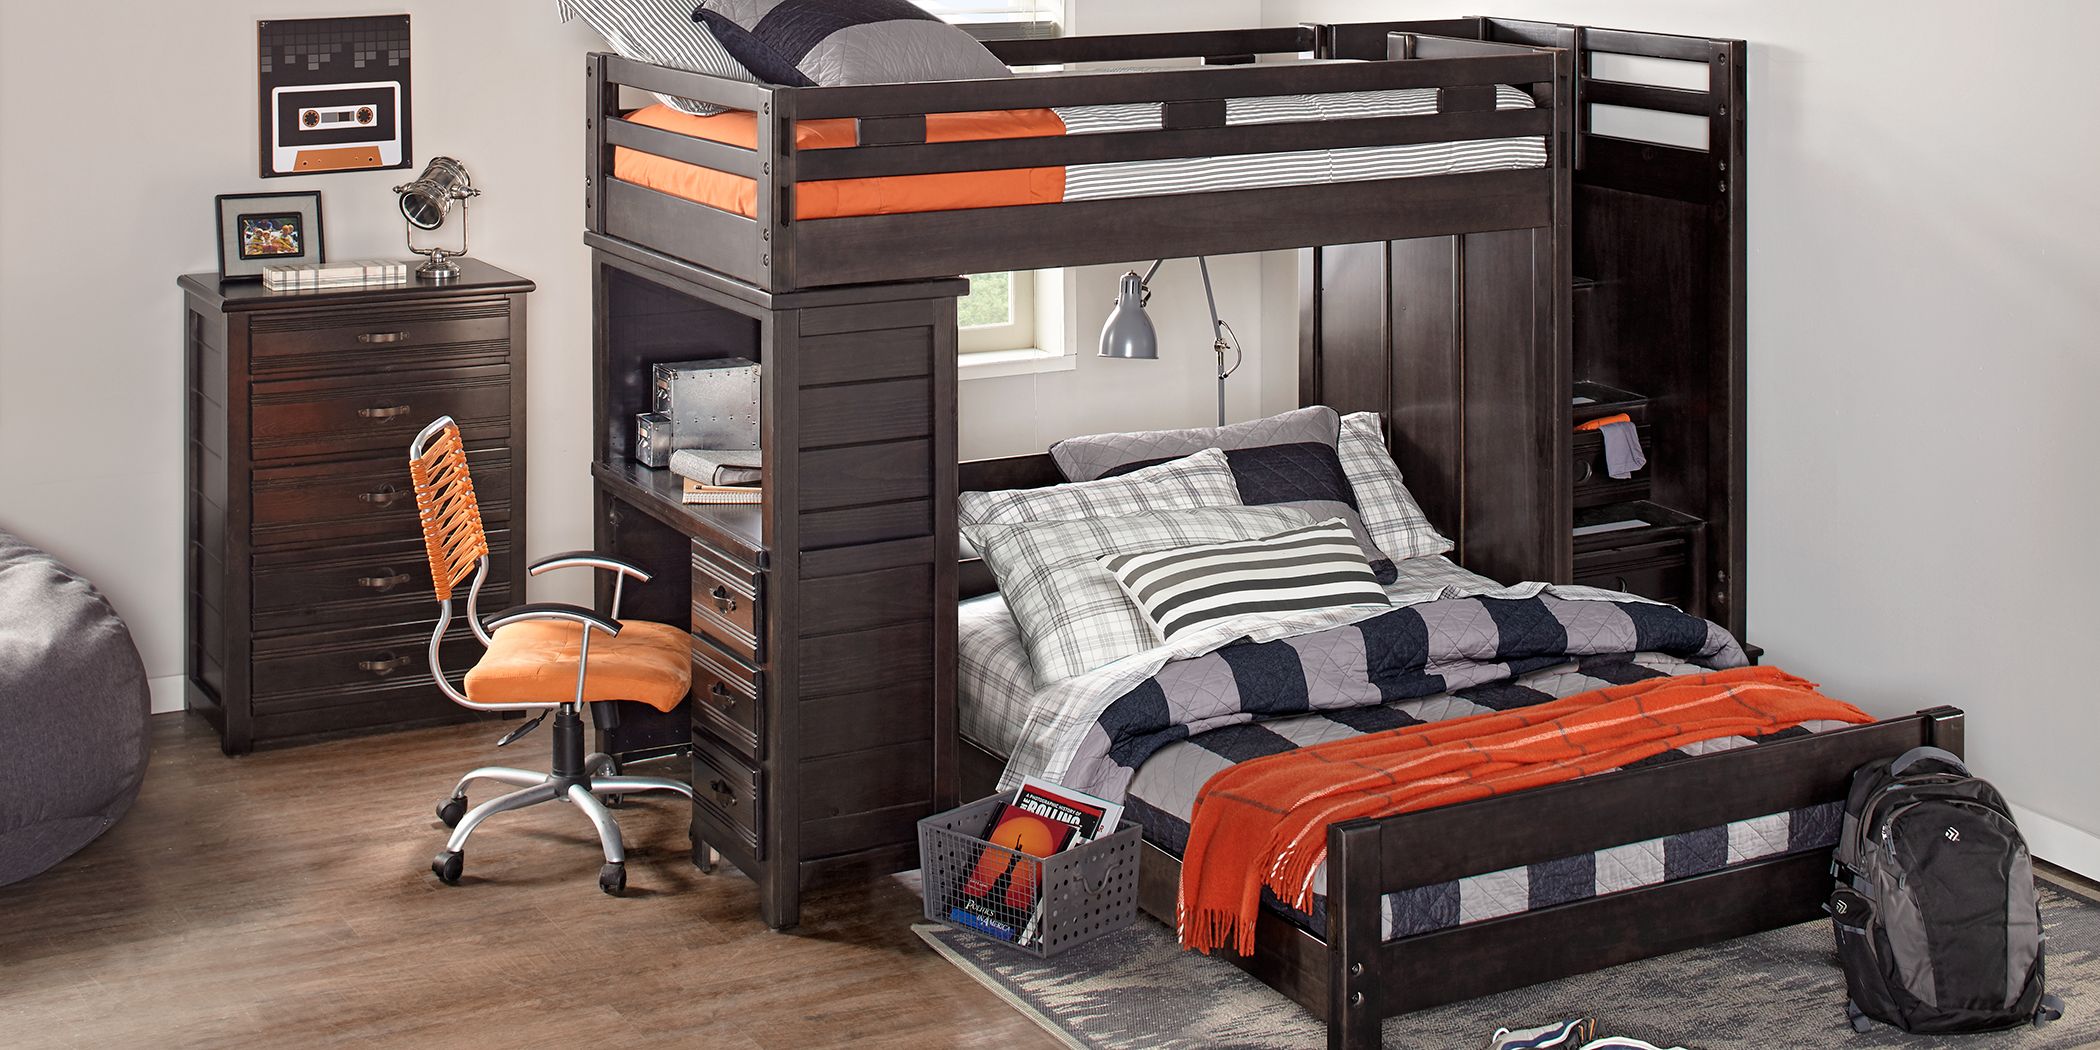 Creekside Charcoal Twin Full Step Bunk, Creekside Stone Wash Twin Twin Step Bunk Bed With Desk